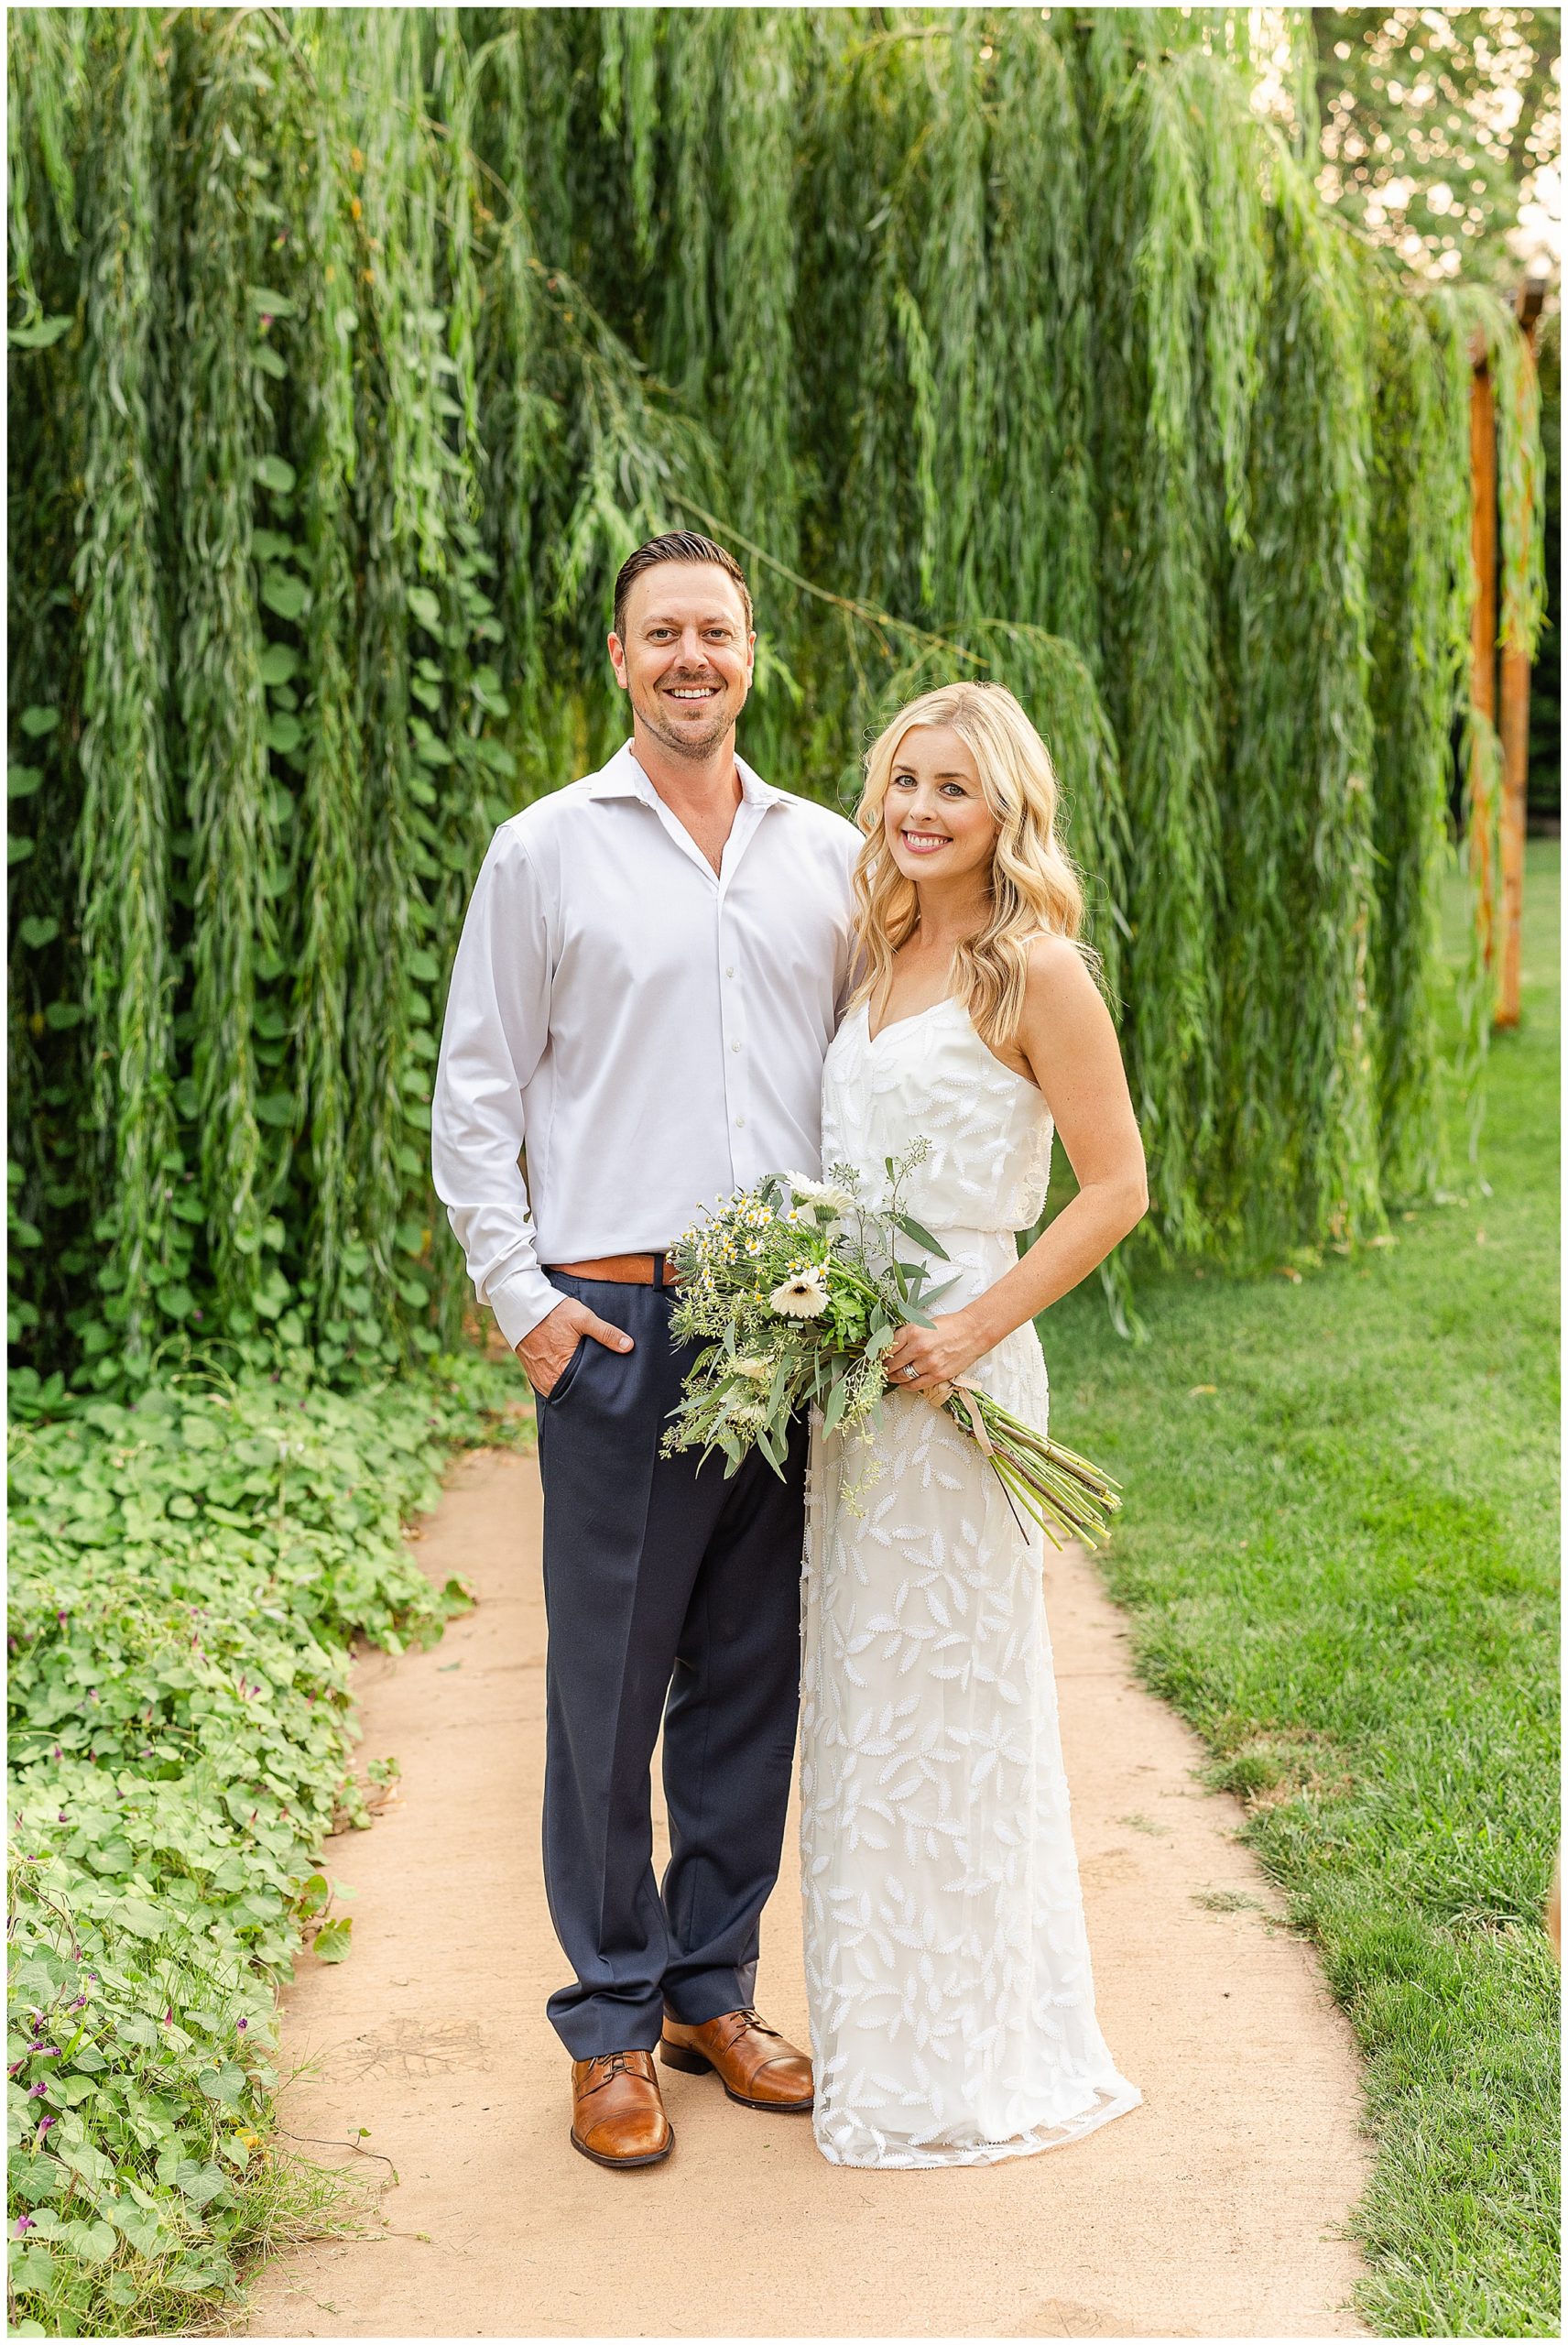 Ten Year Wedding Anniversary with Willow Tree at White Ranch Events | Kristi + Kyle